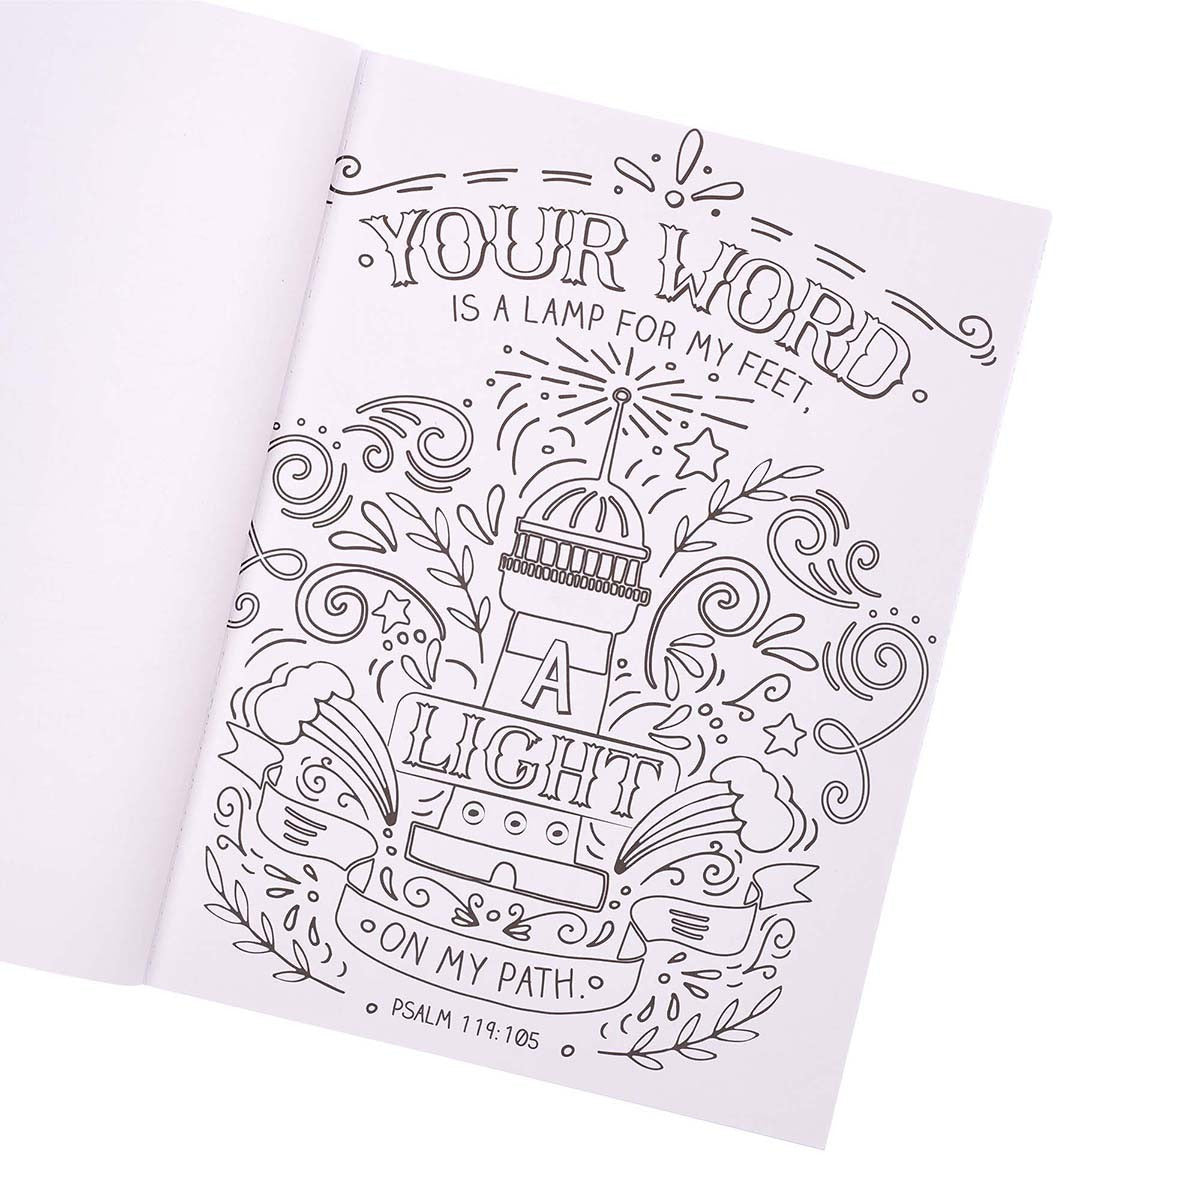 I Know the Plans I Have for You Coloring Book for Adults - Jeremiah 29:11